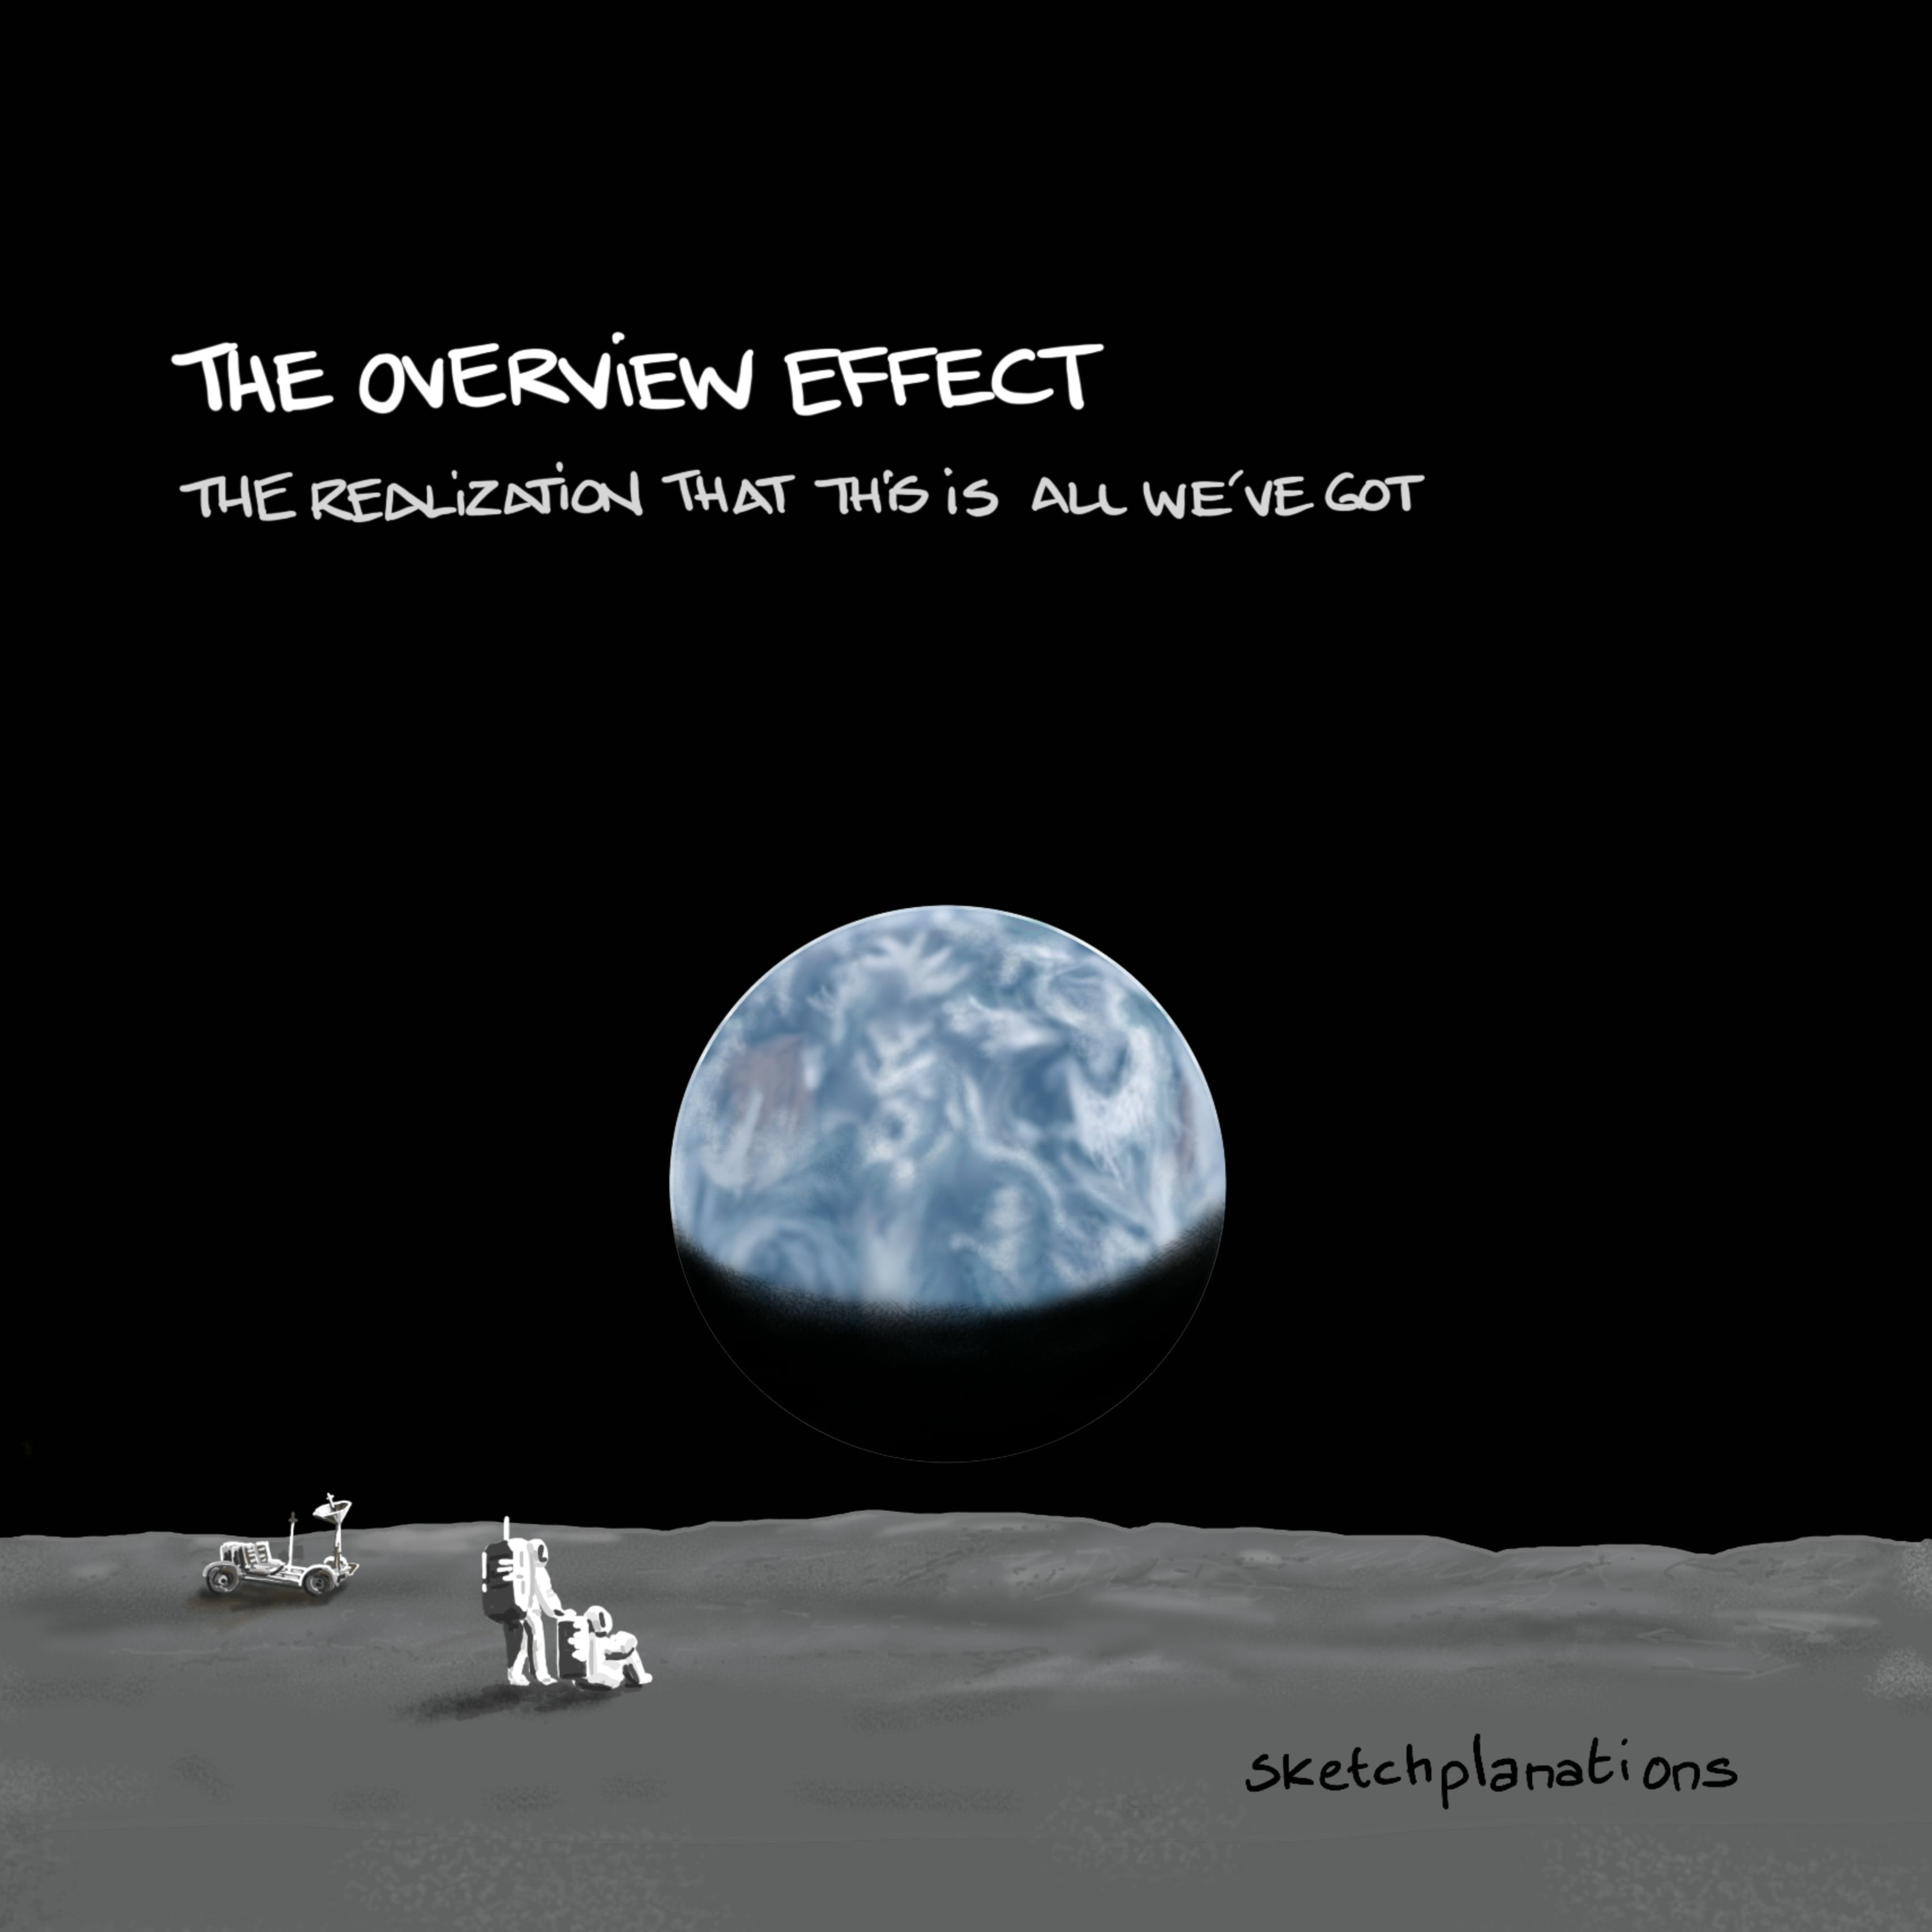 The overview effect illustration: 2 astronauts have a bit of a moment and need to sit down when taking in the majestic view of Earth from the moon and realise this is all we've got.